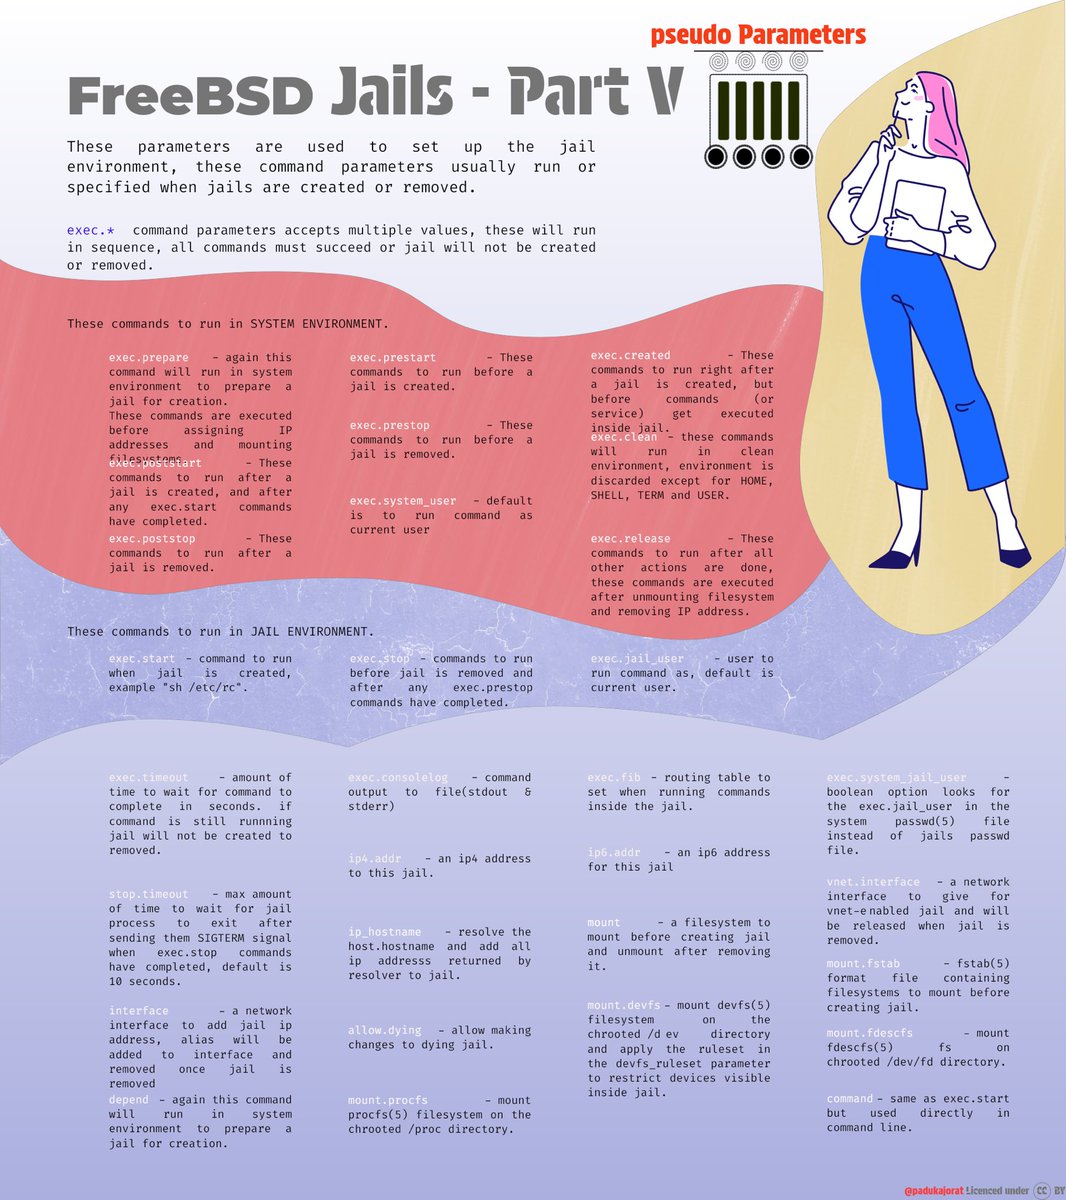 #FreeBSD jails final part, after this i may start with examples. I have tried something new this time with design. hope you like it.